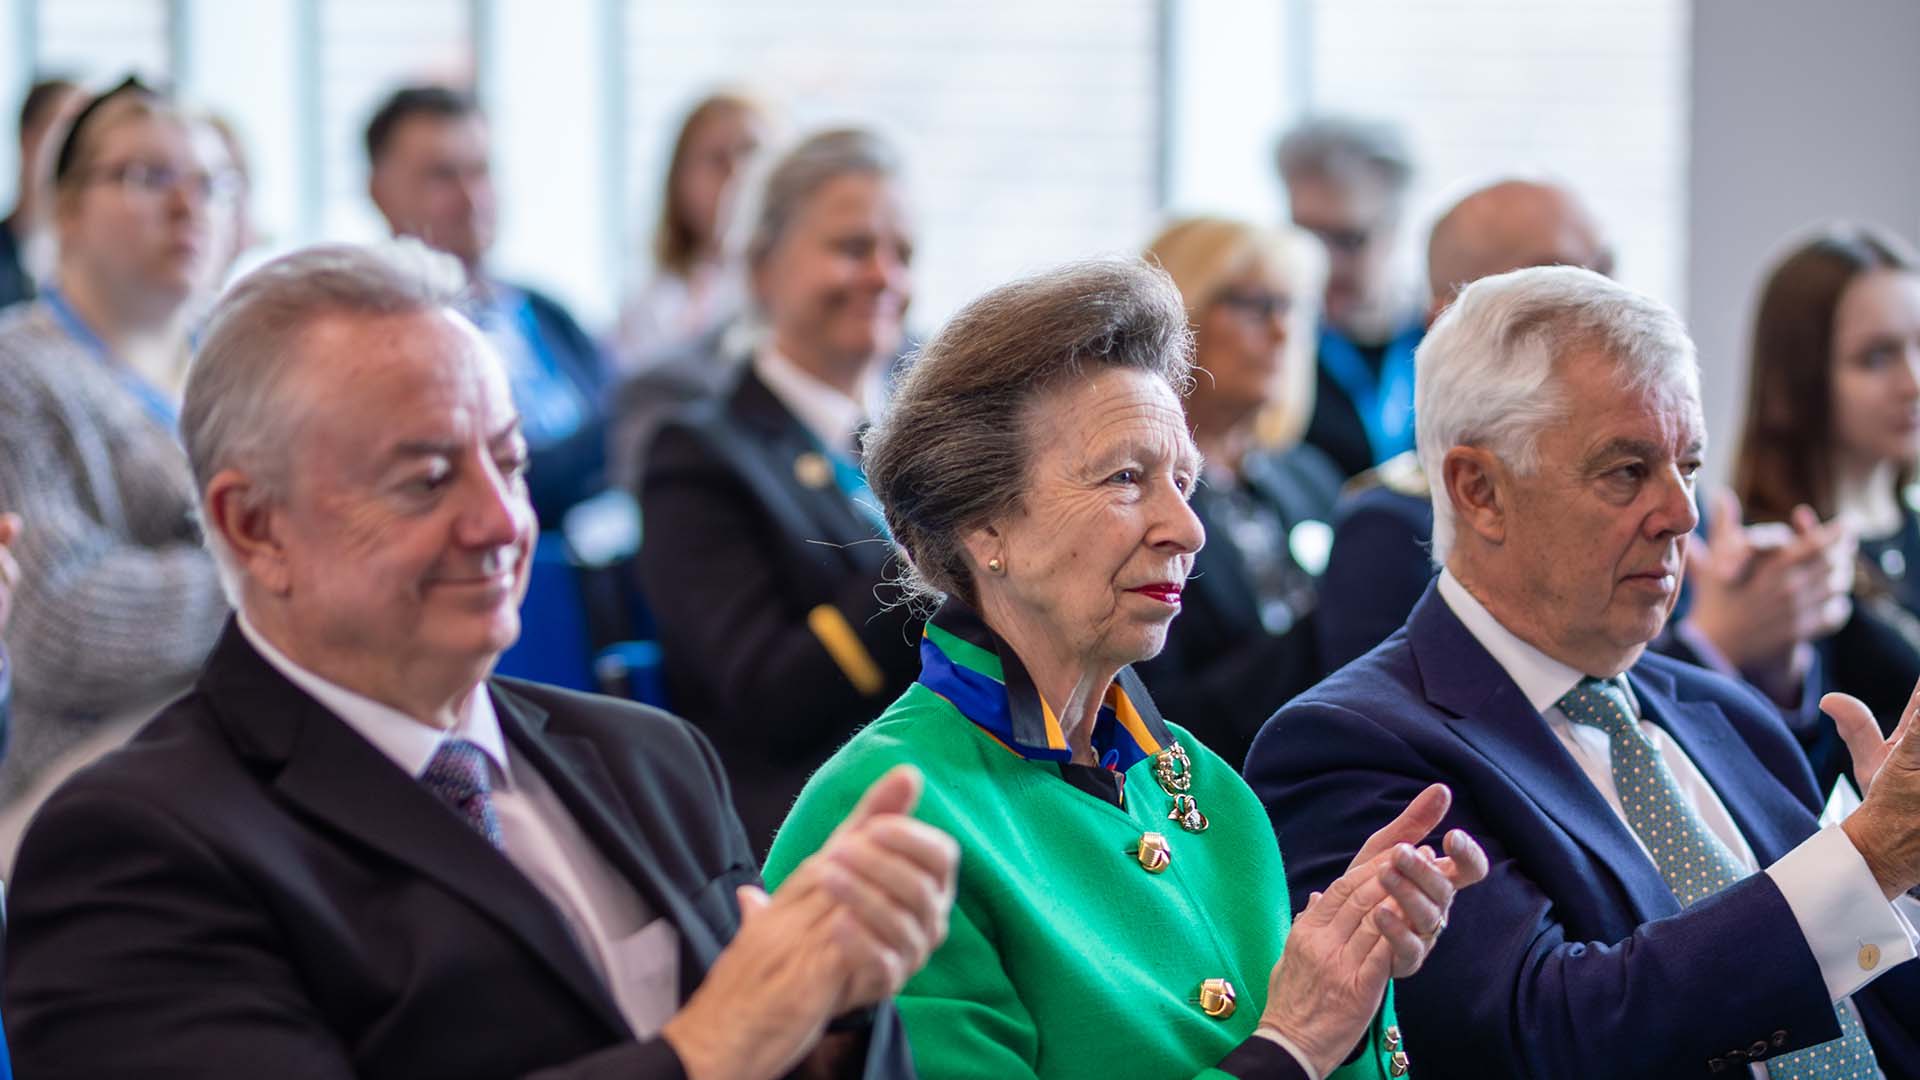 The Princess Royal chats to a group of fashion and textiles students